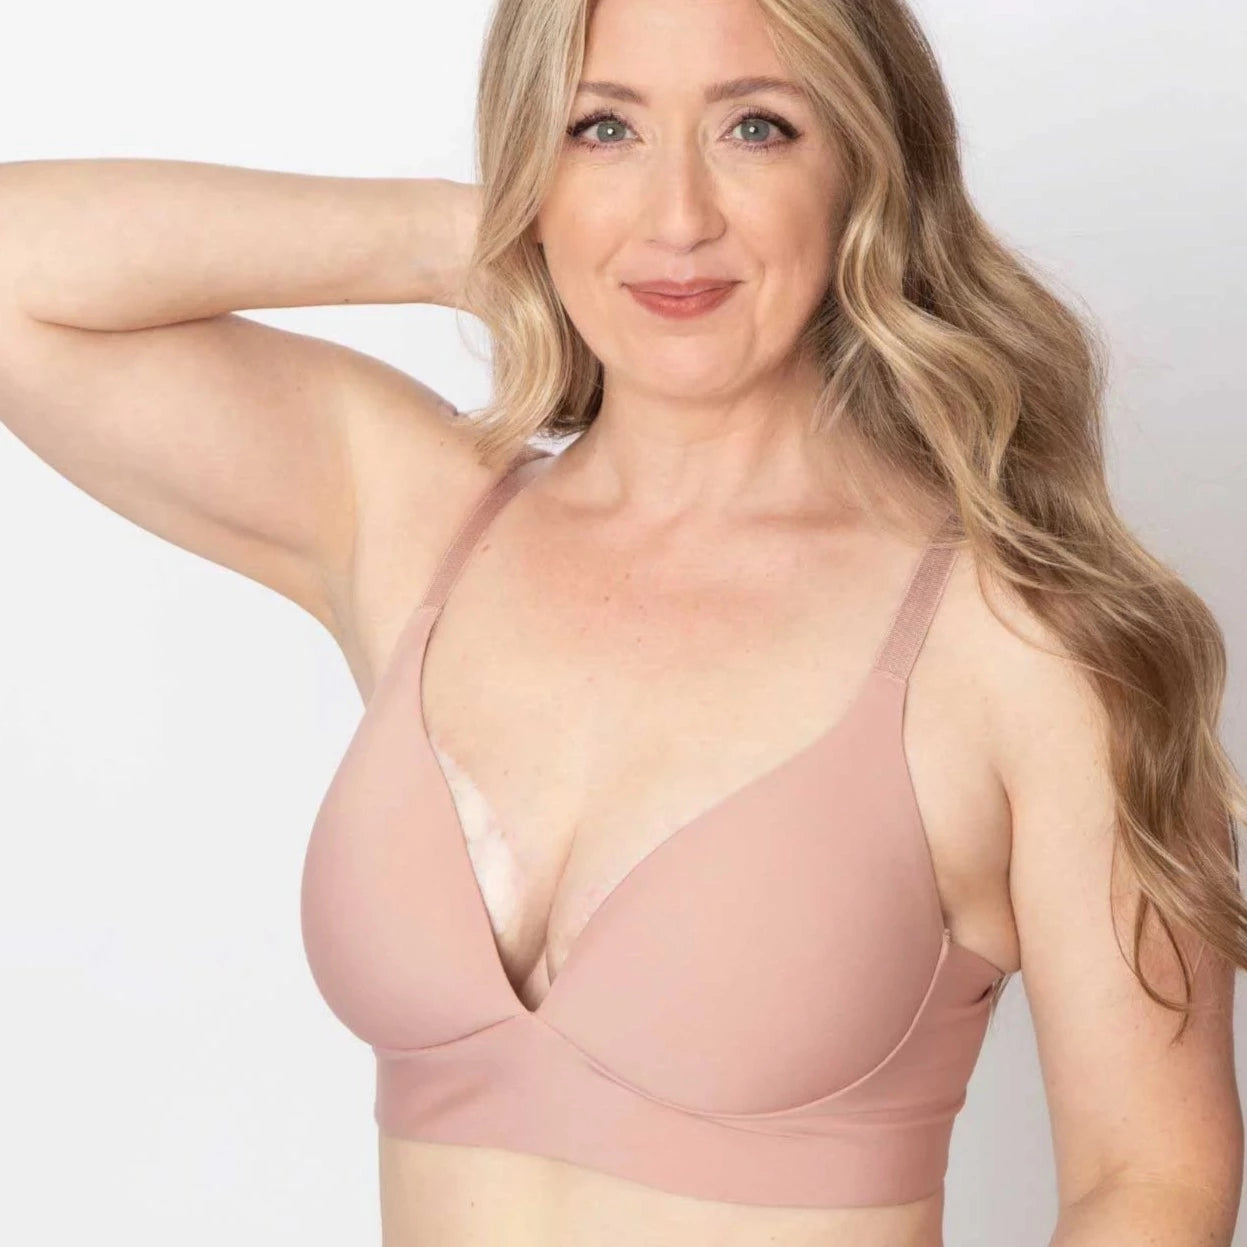 Trish Moulded Cup Bra by AnaOno | Blush | Underwear for women touched by breast cancer